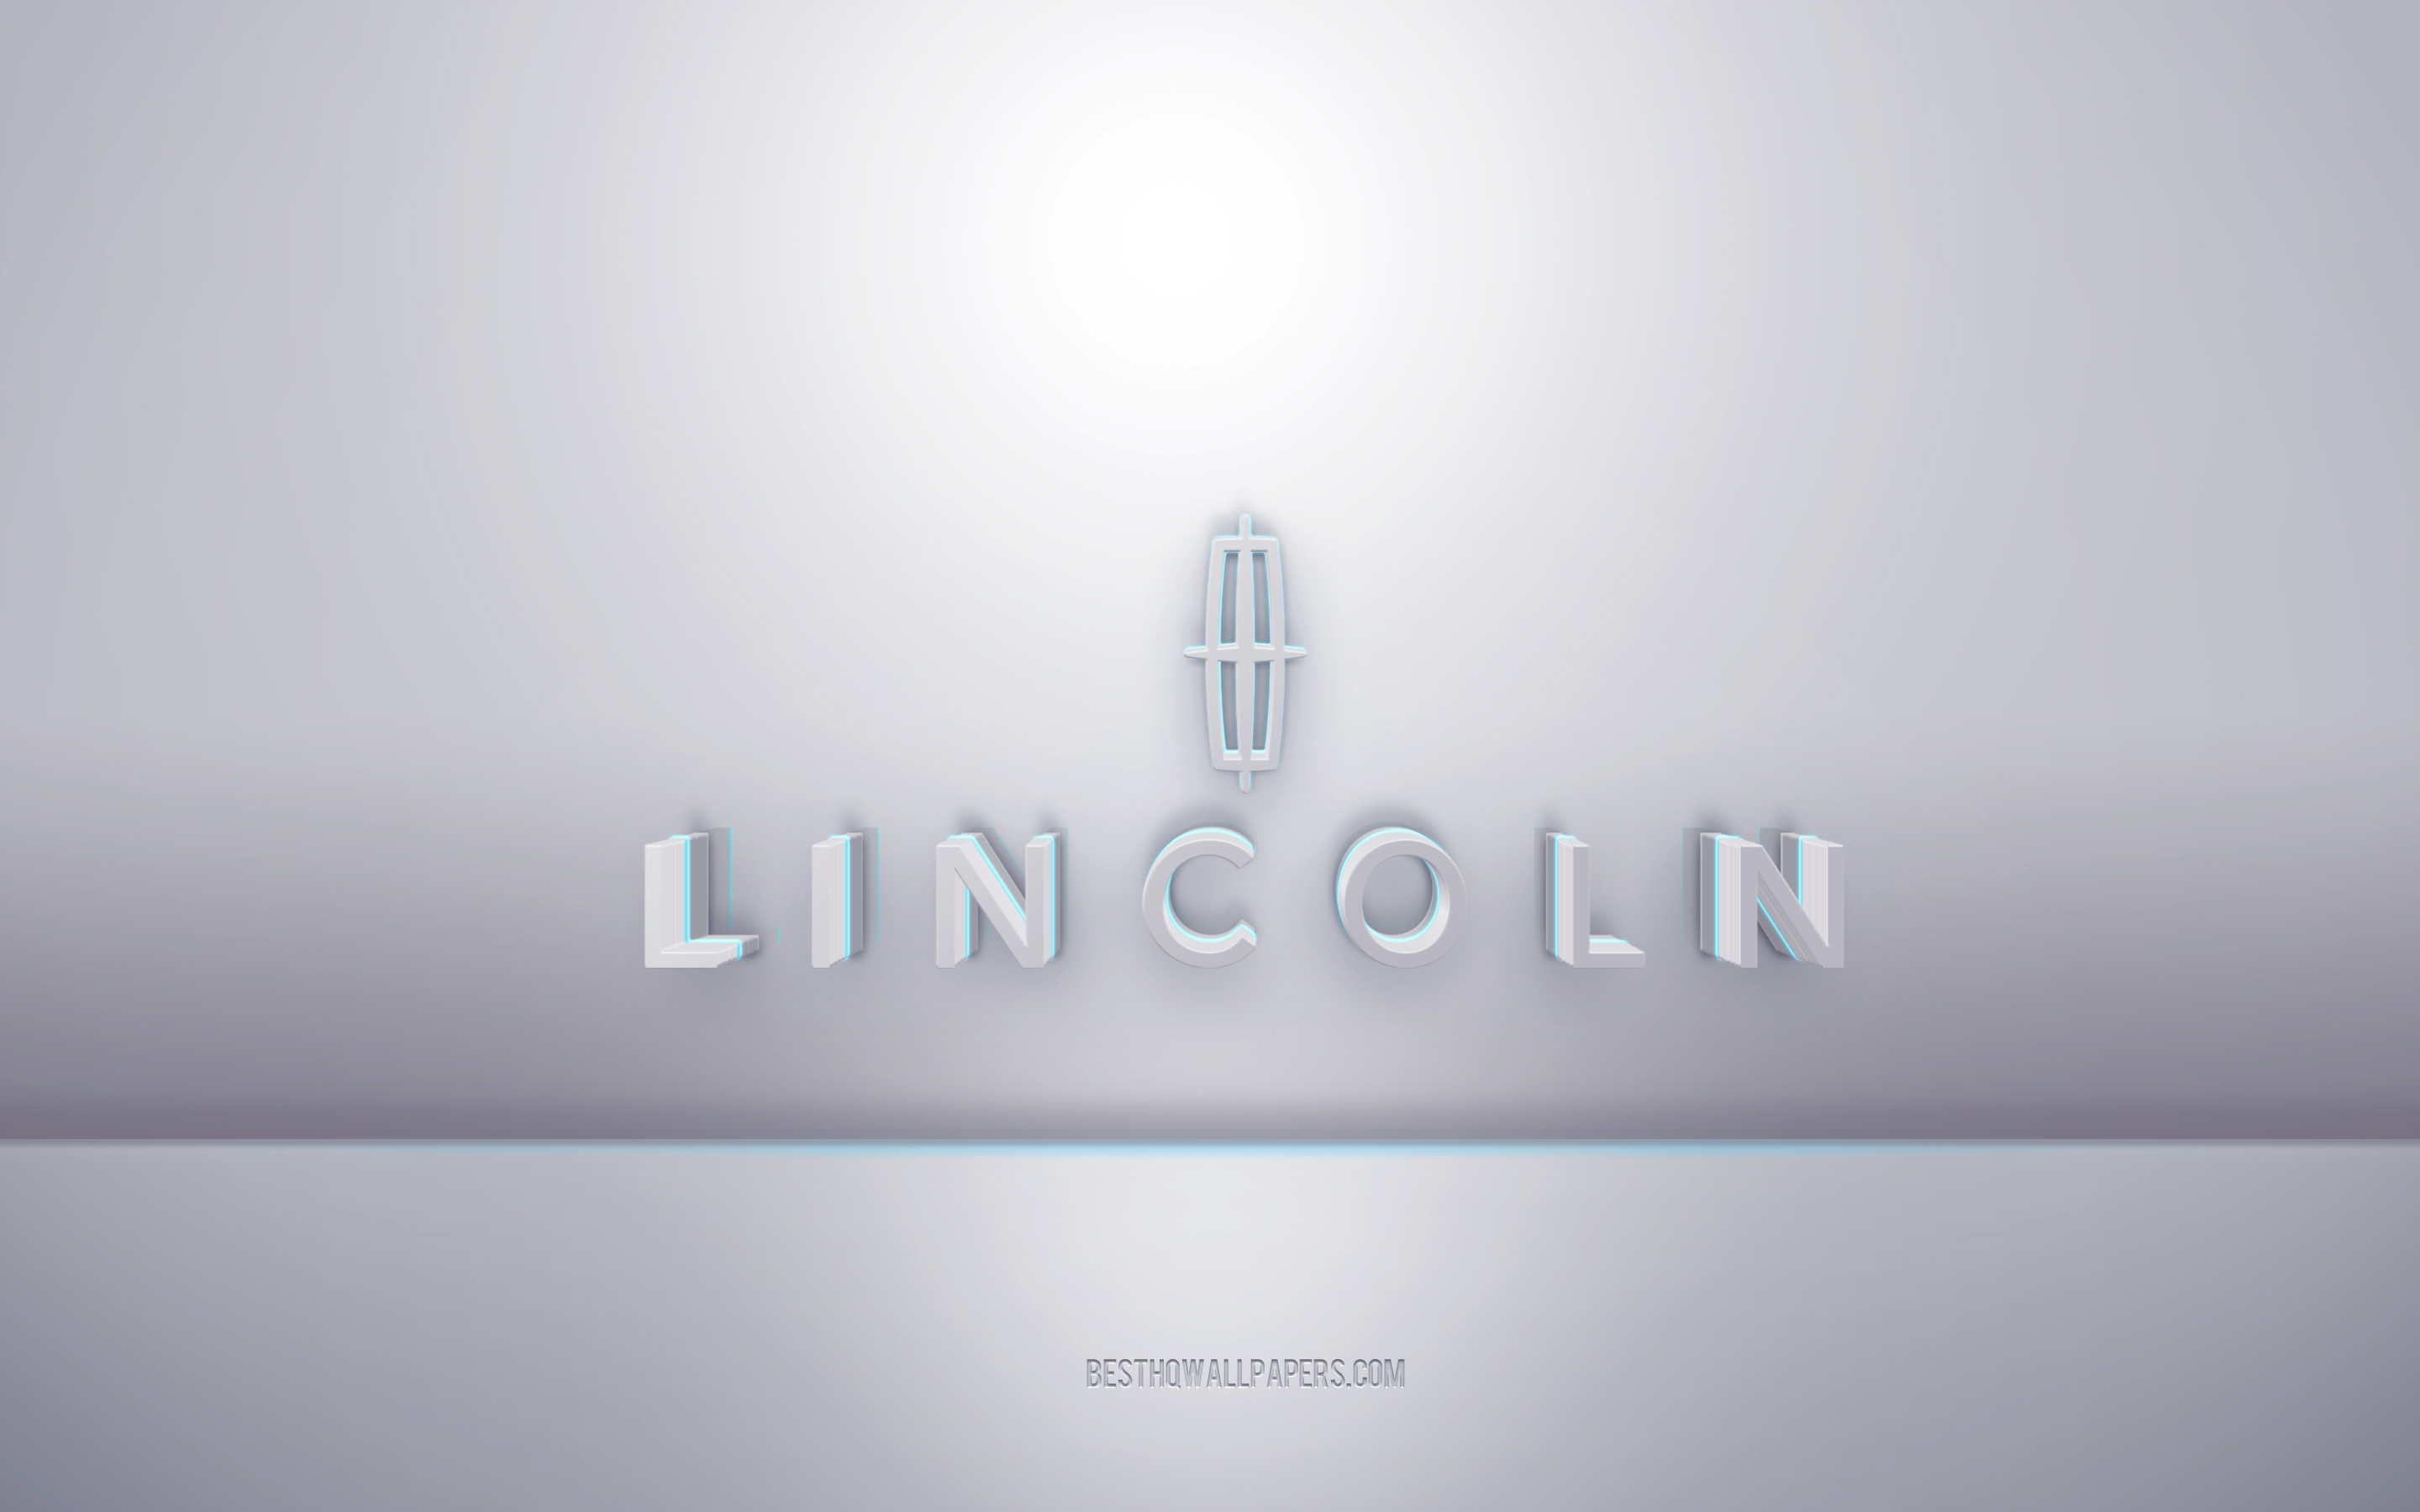 Home - City of Lincoln